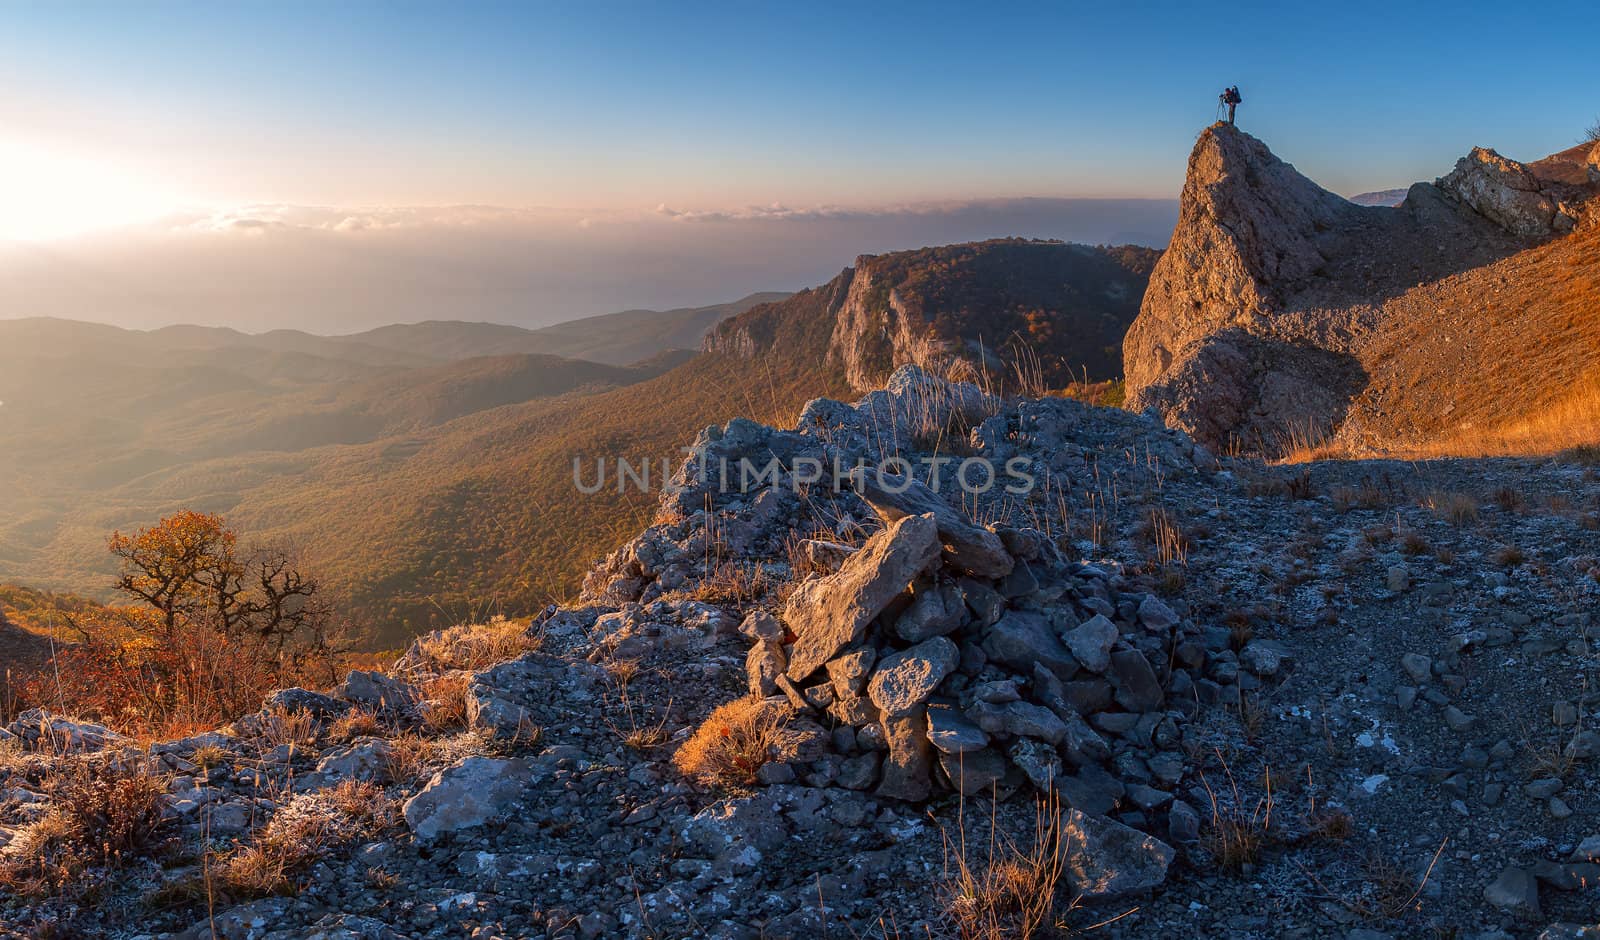 A man standing at mountain top with camera against a beautiful sunrise